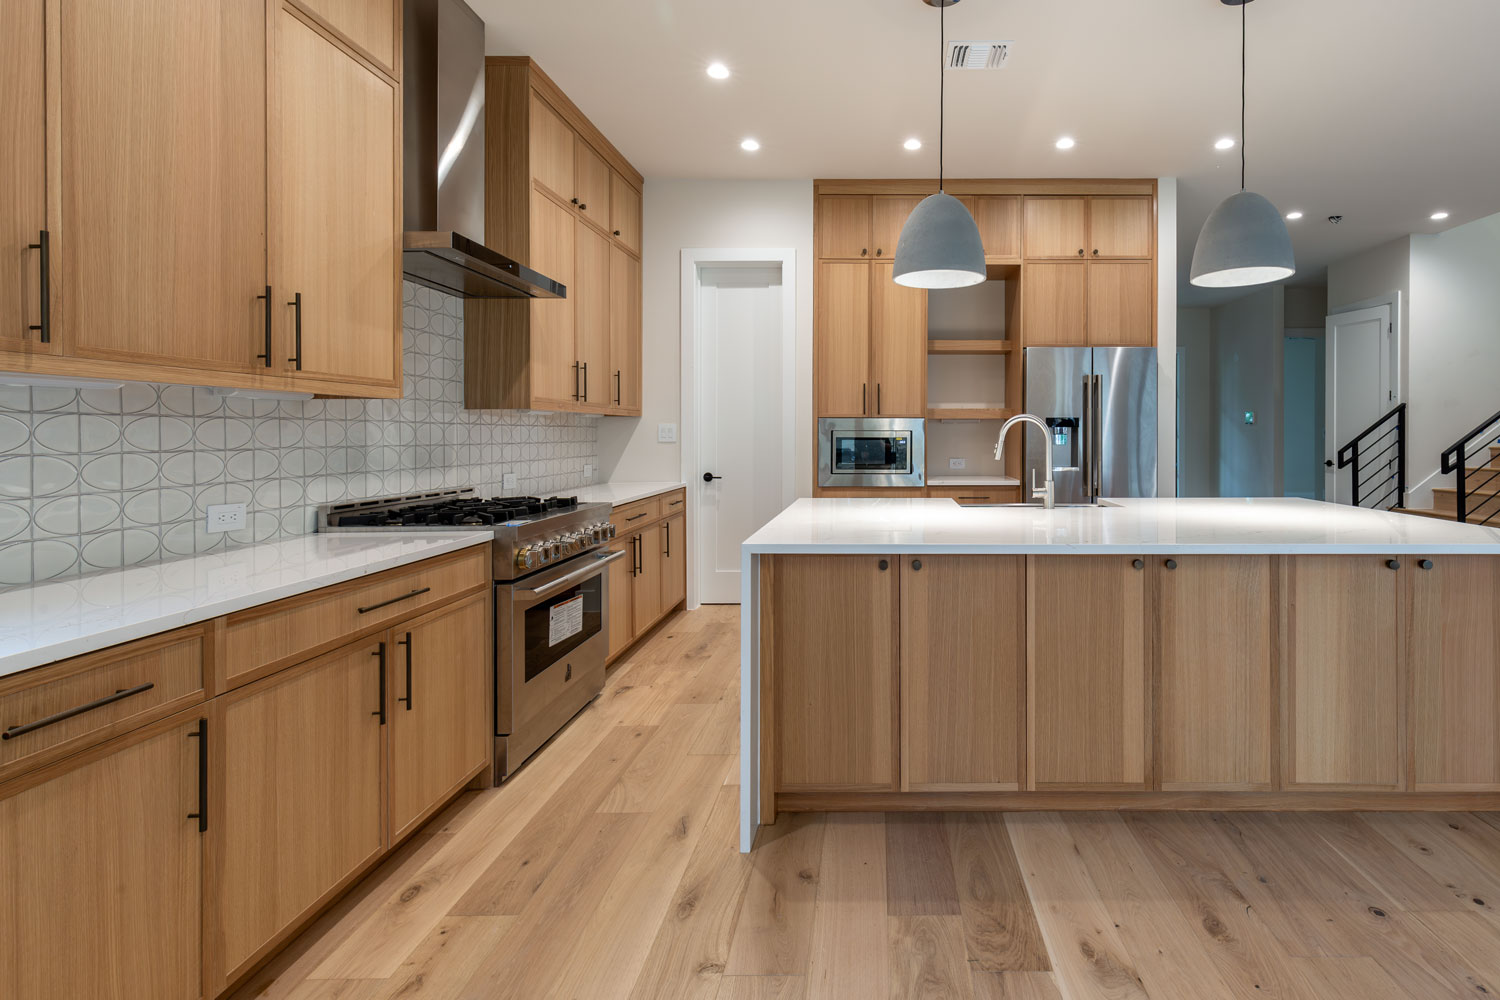 Kitchen with rift white oak 4S 1" Shaker cabinet doors for those looking for slim shaker look without mitered construction